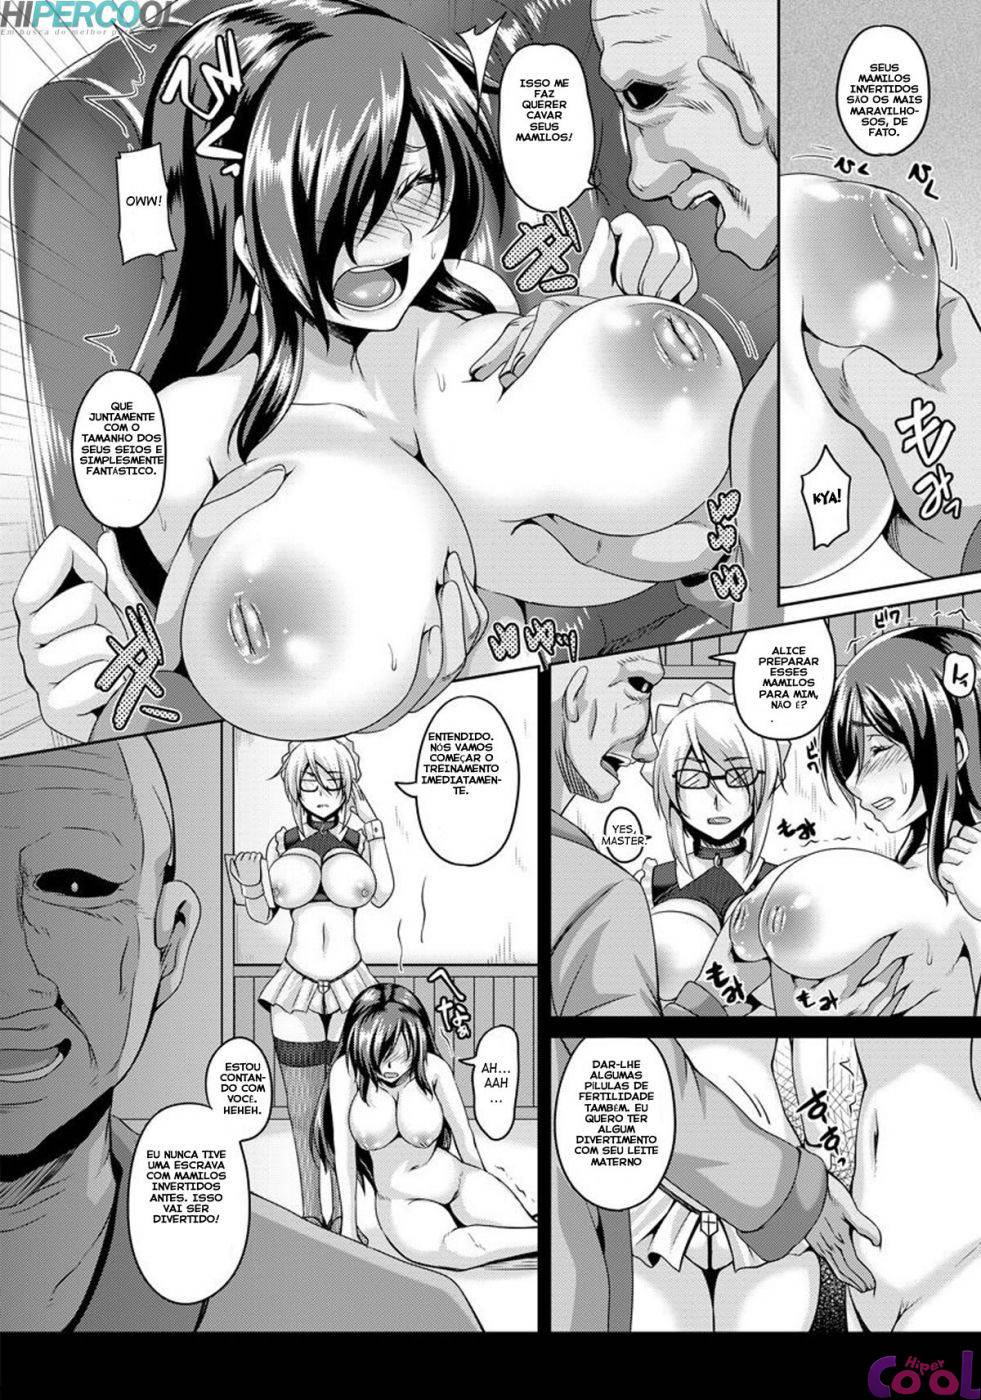 maid-rei-collection-2-chapter-01-page-04.jpg